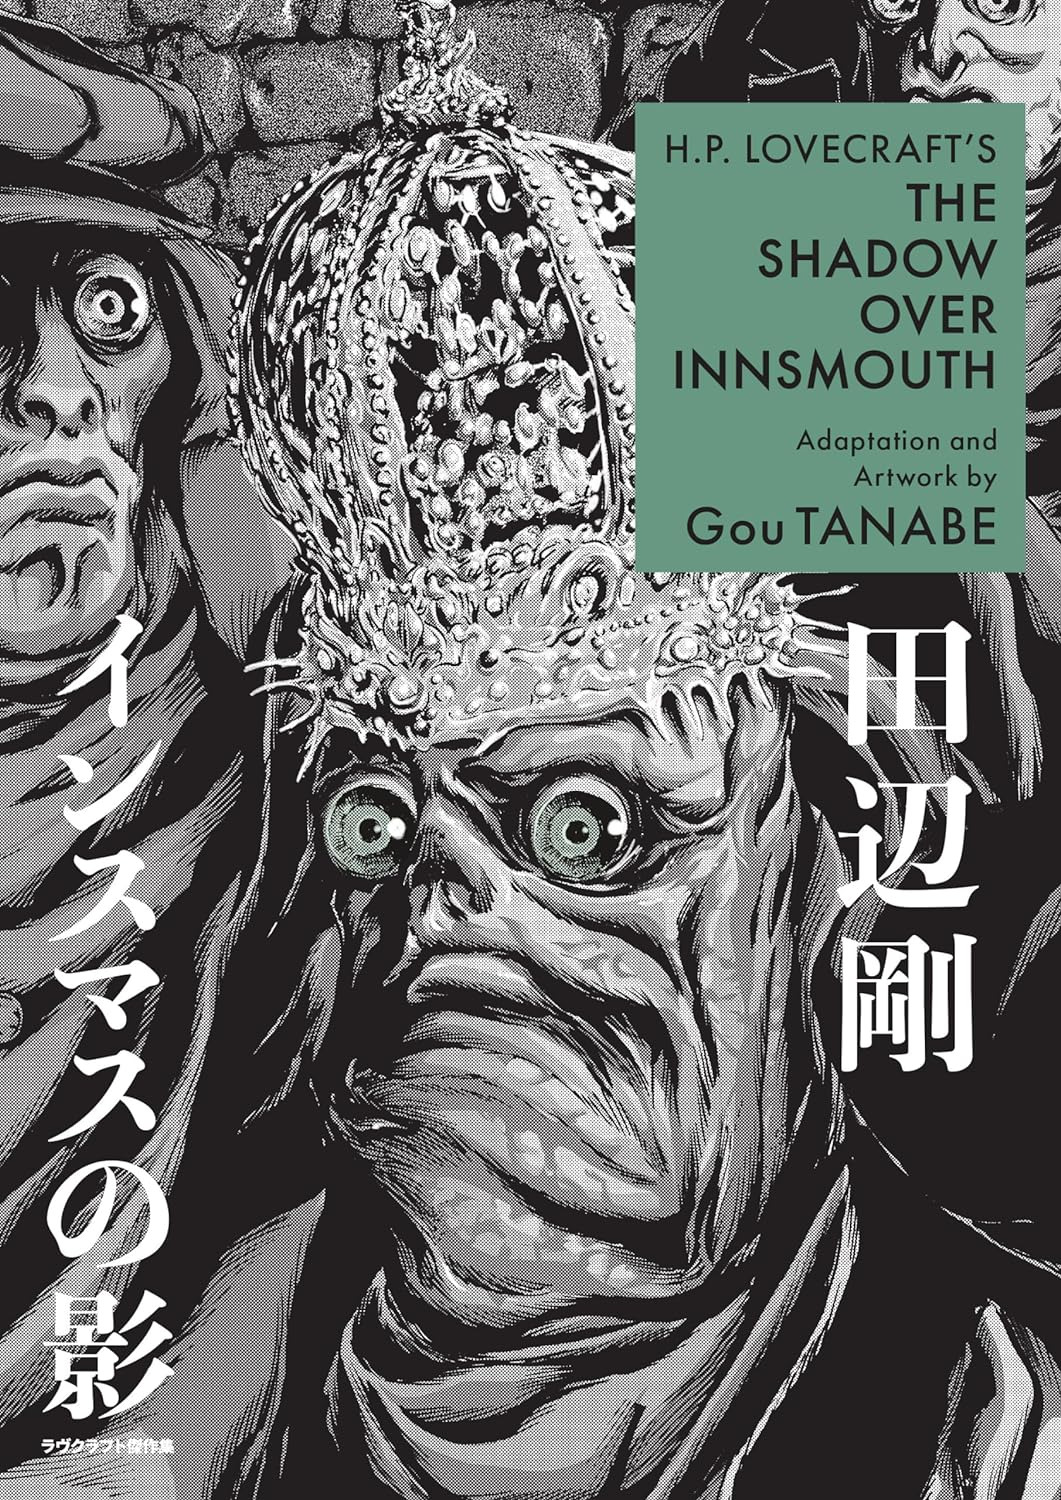 H.P. Lovecraft'S the Shadow over Innsmouth (Manga) - Paperback (NEW)